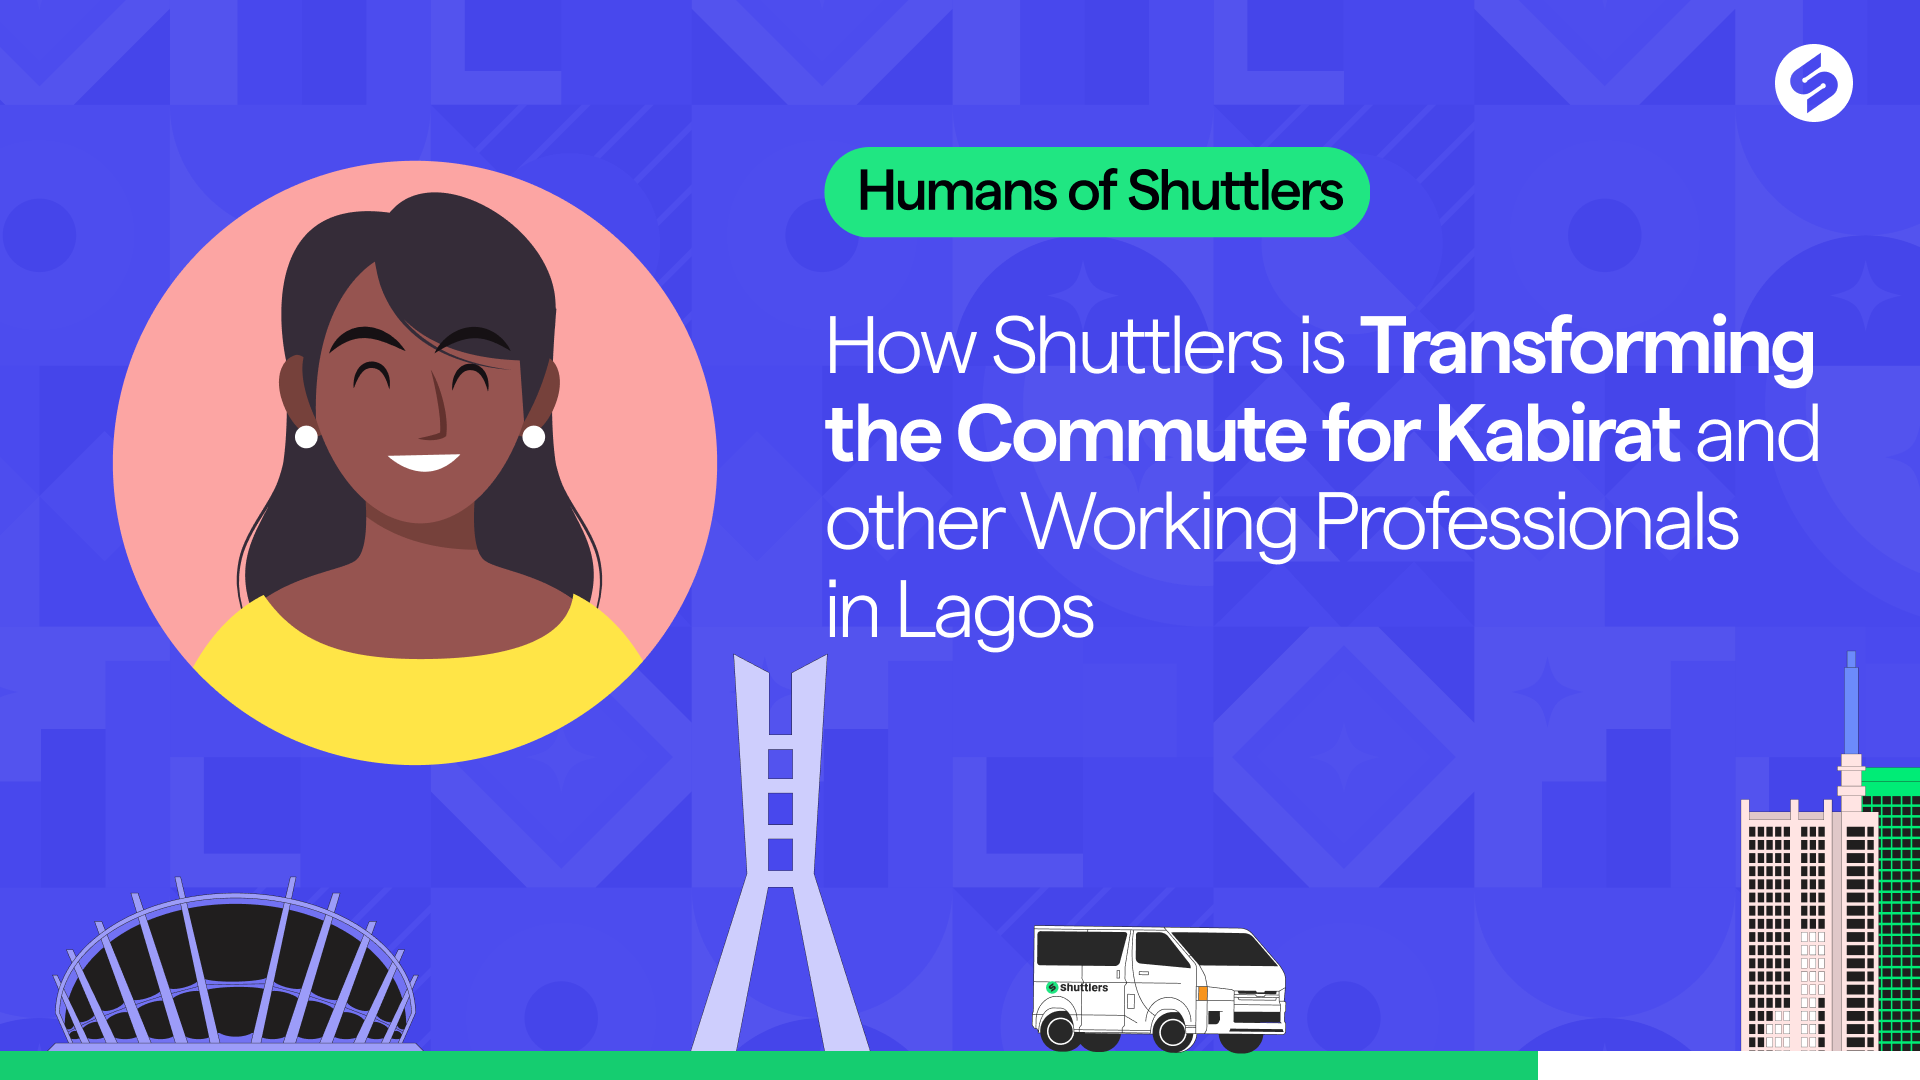 How Shuttlers is Transforming the Commute for Kabirat and Other Working Professionals in Lagos